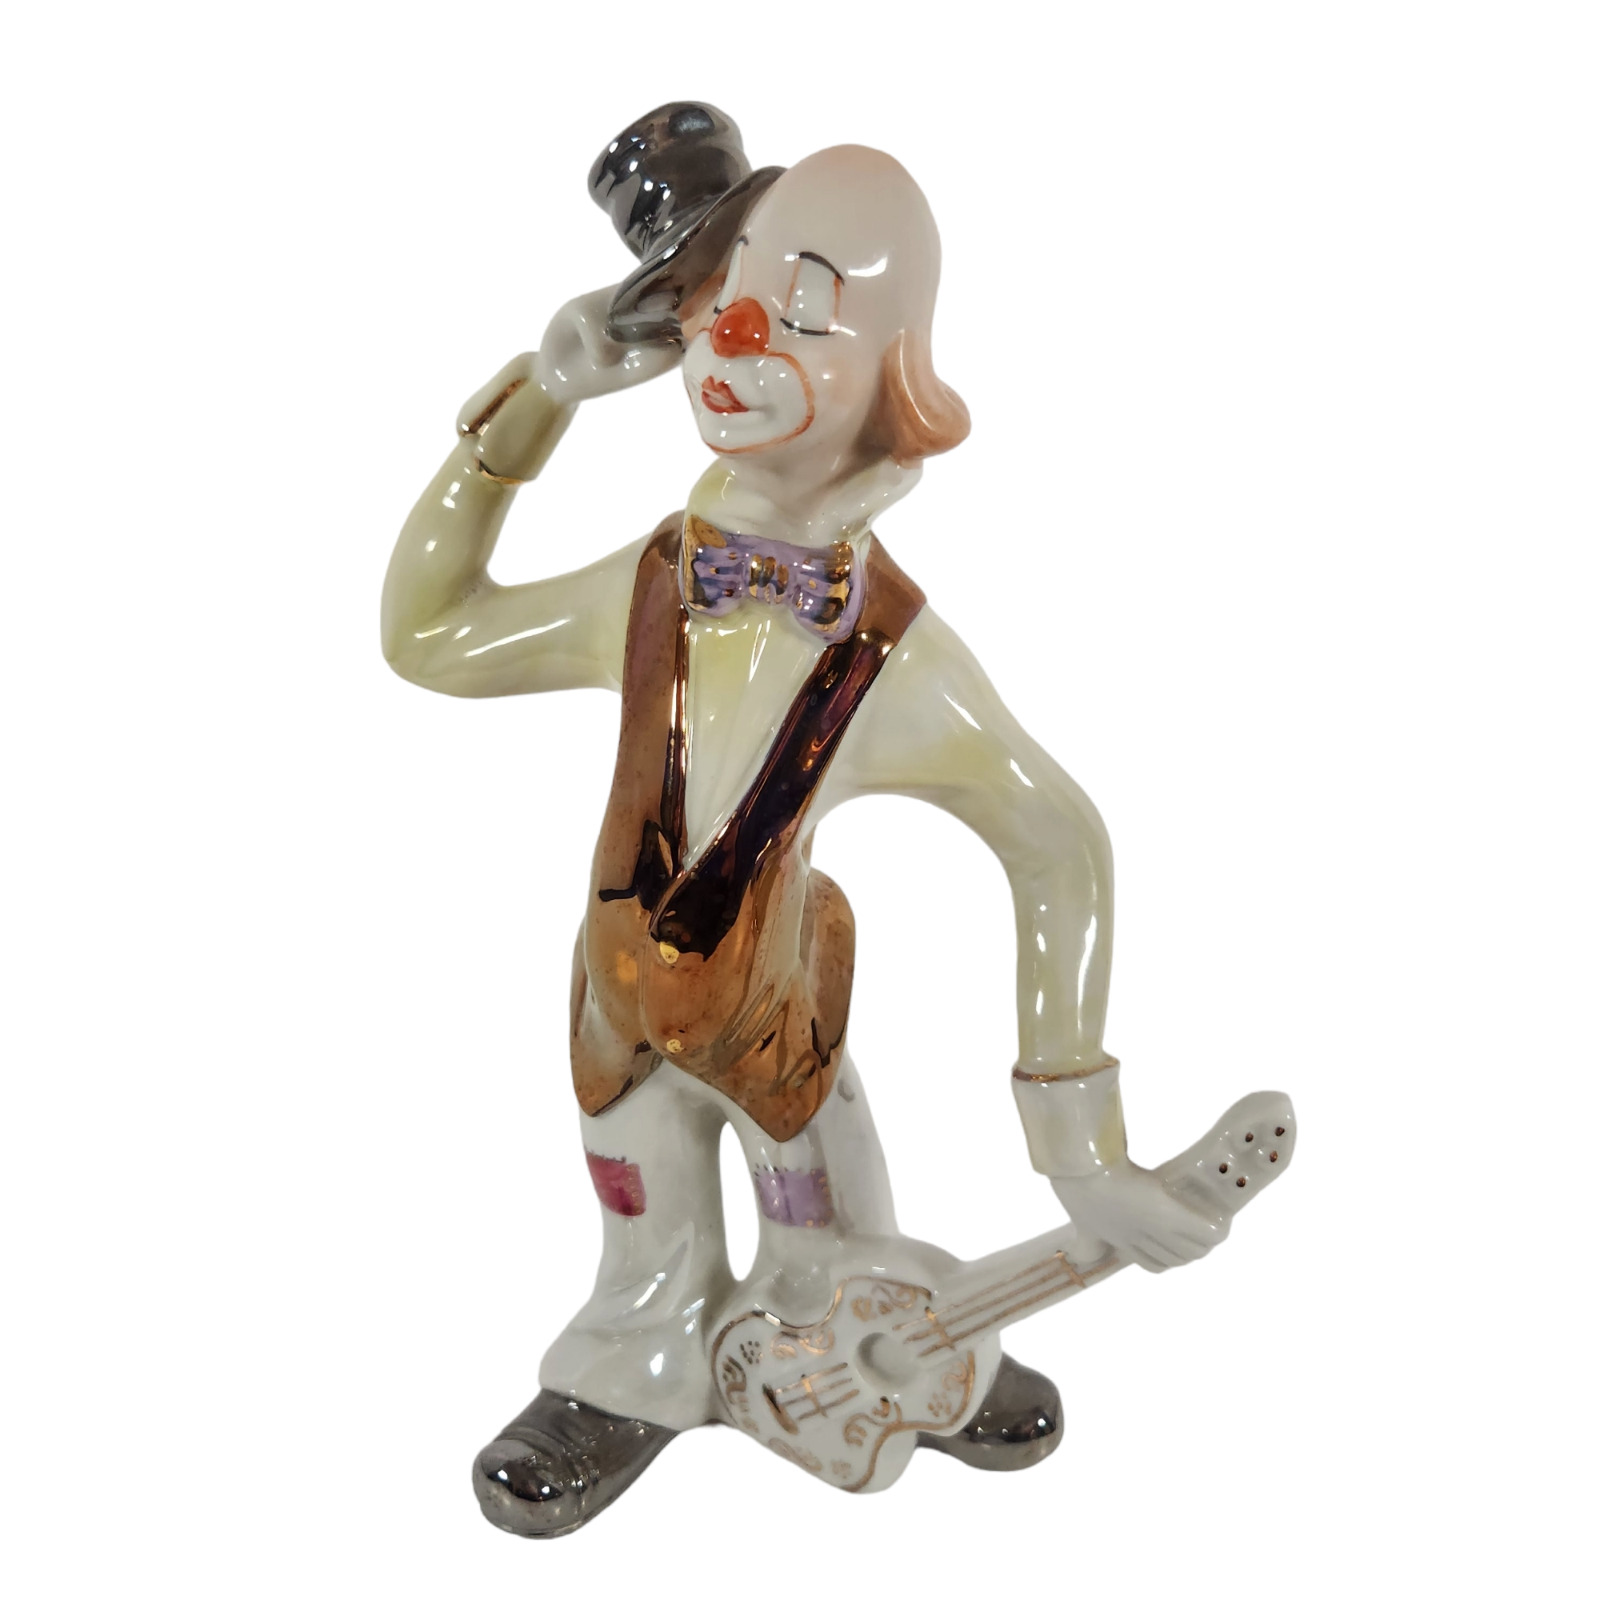 Porcelain Clown Hobo Figurine With Guitar Top Hat and Bow Tie Decor Collectible